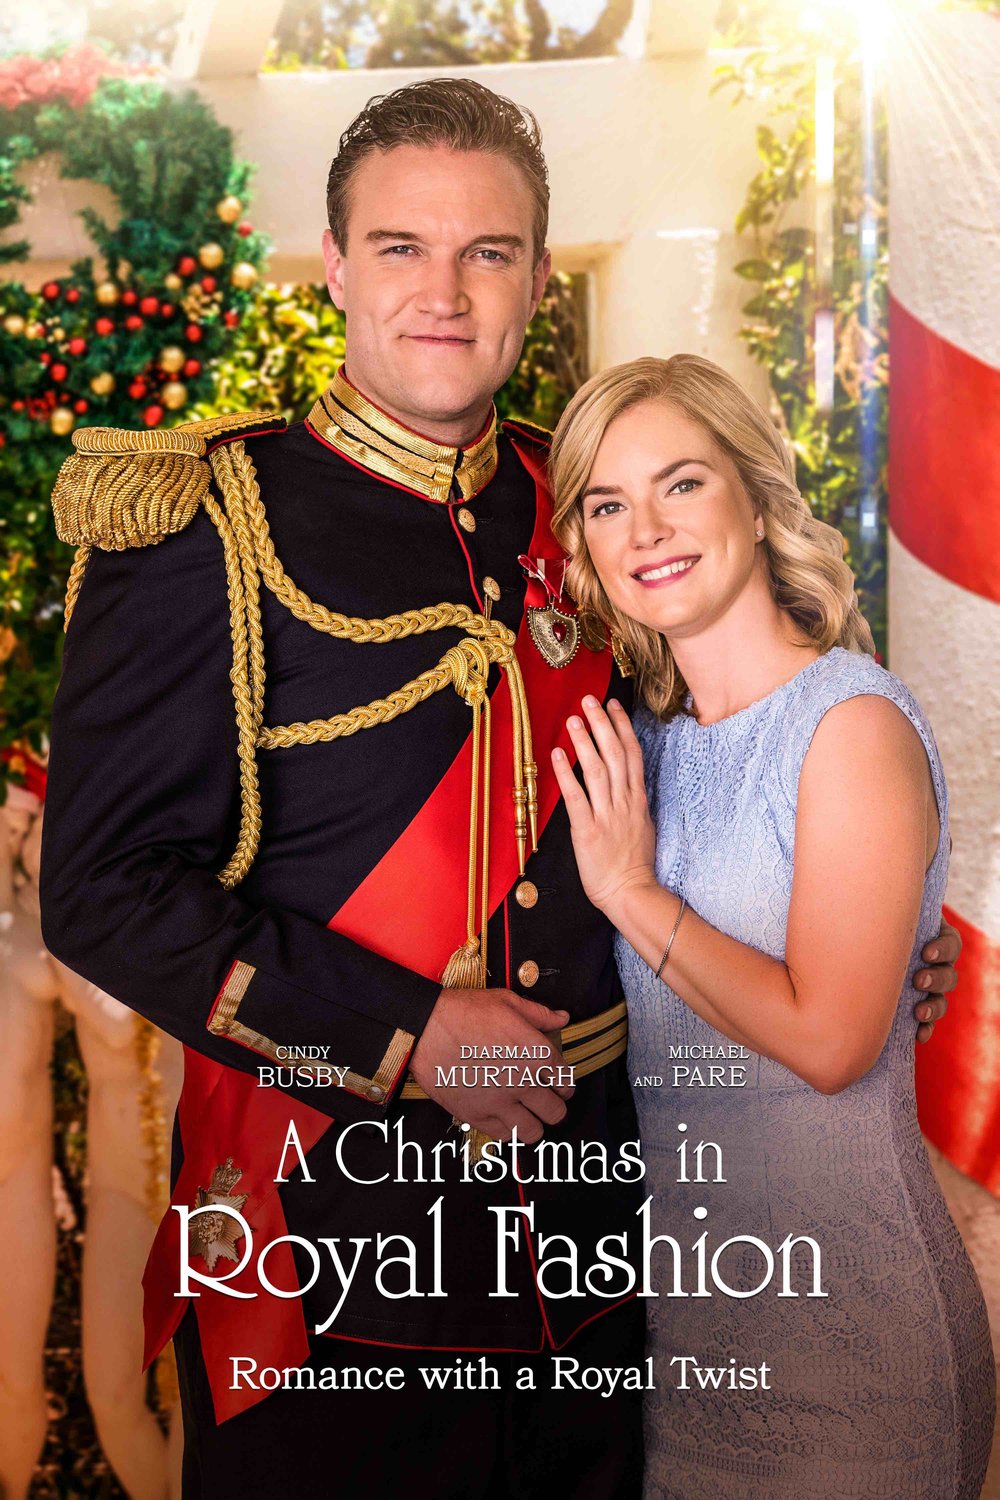 Poster of the movie A Christmas in Royal Fashion